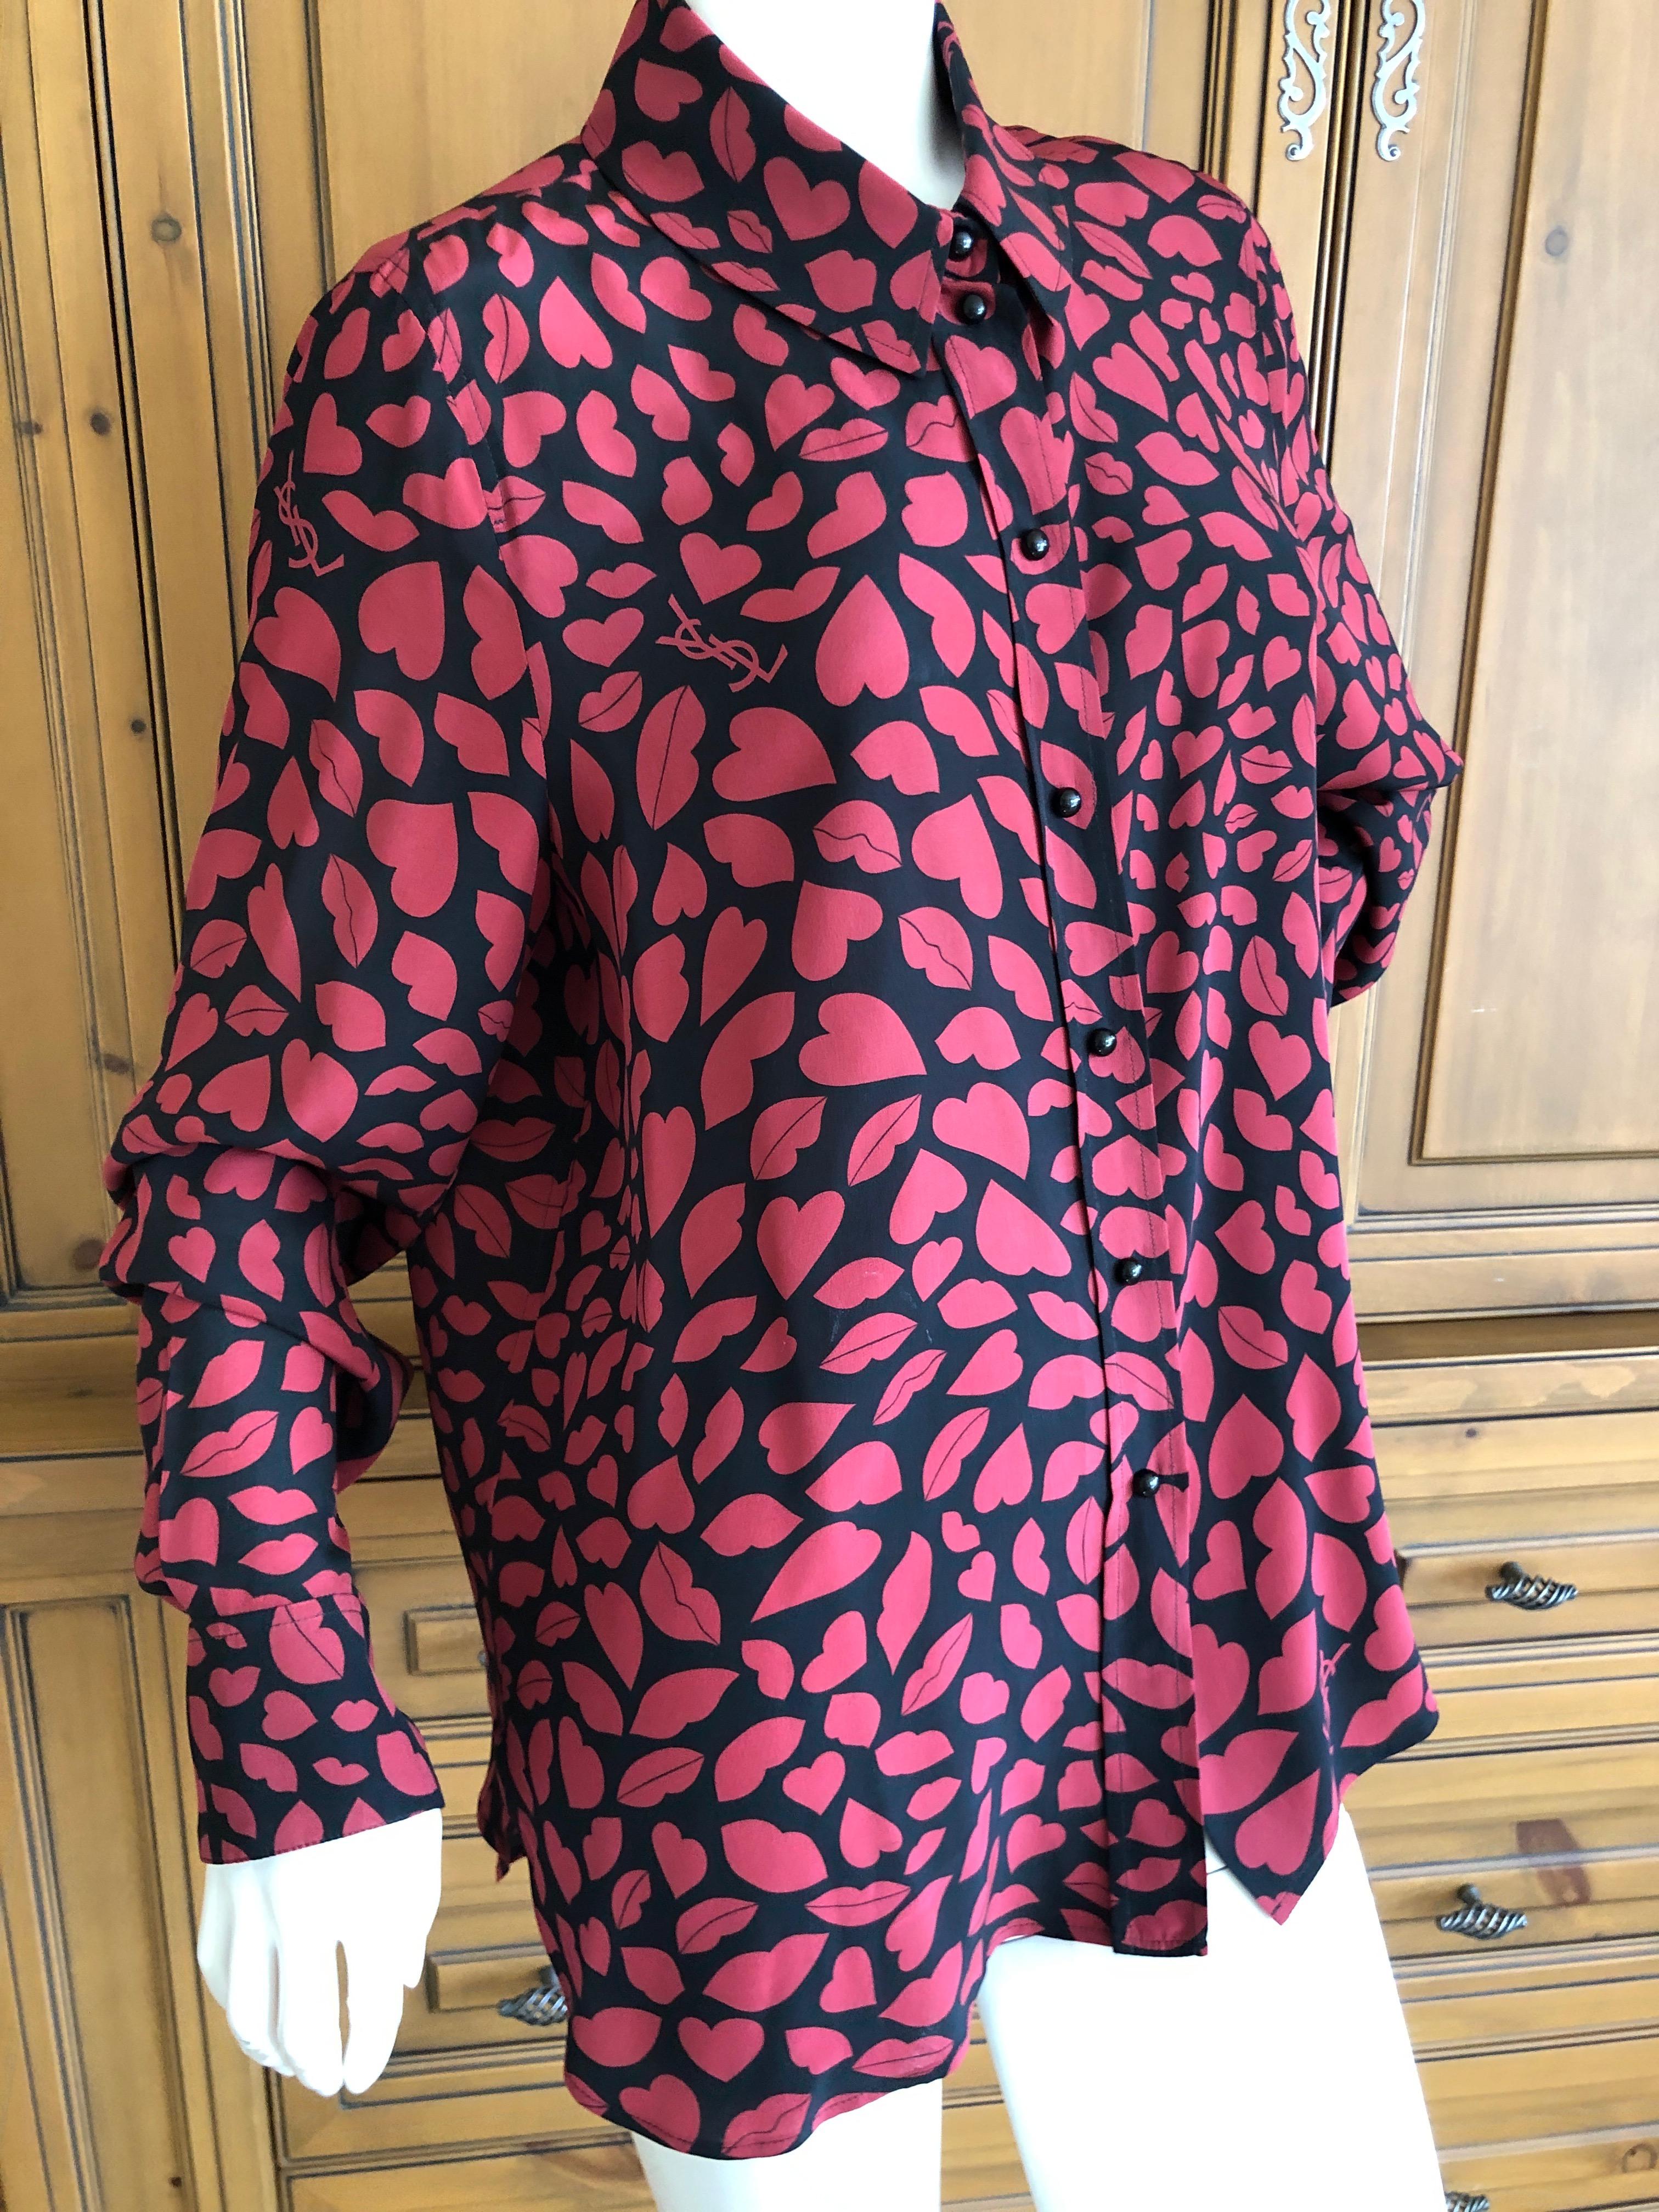 Yves Saint Laurent Vintage Heart and Lips Print Snap Front Blouse
There is no size tag, but it is size Large
Bust 40